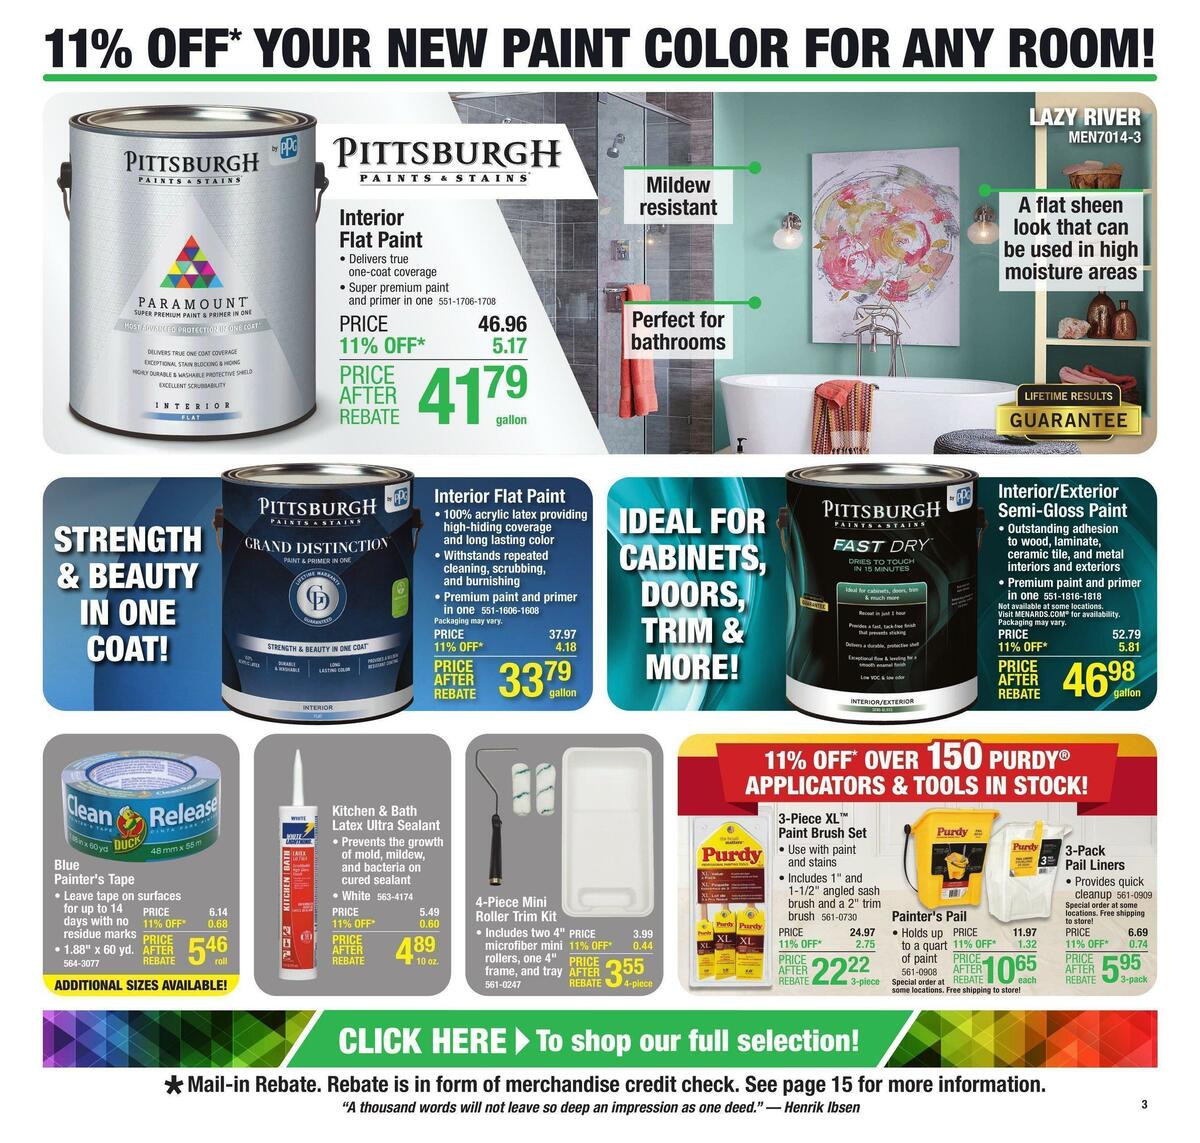 Menards Weekly Ad from October 20